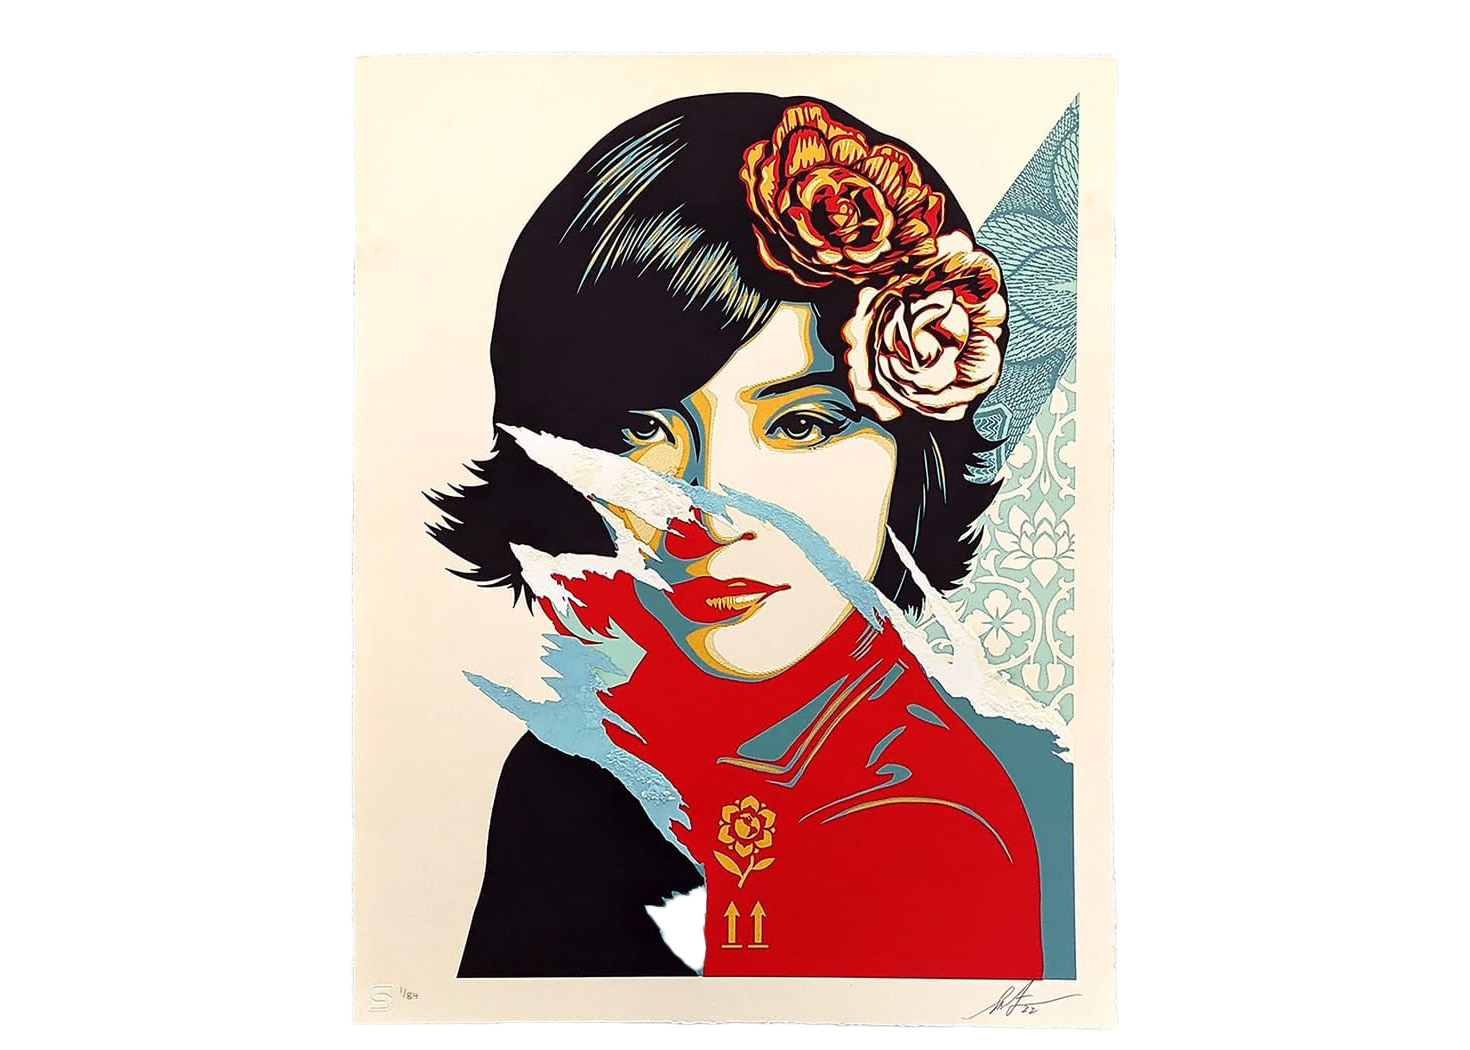 Shepard Fairey x OBEY Open Minds Print (Signed, Edition of 84) - US